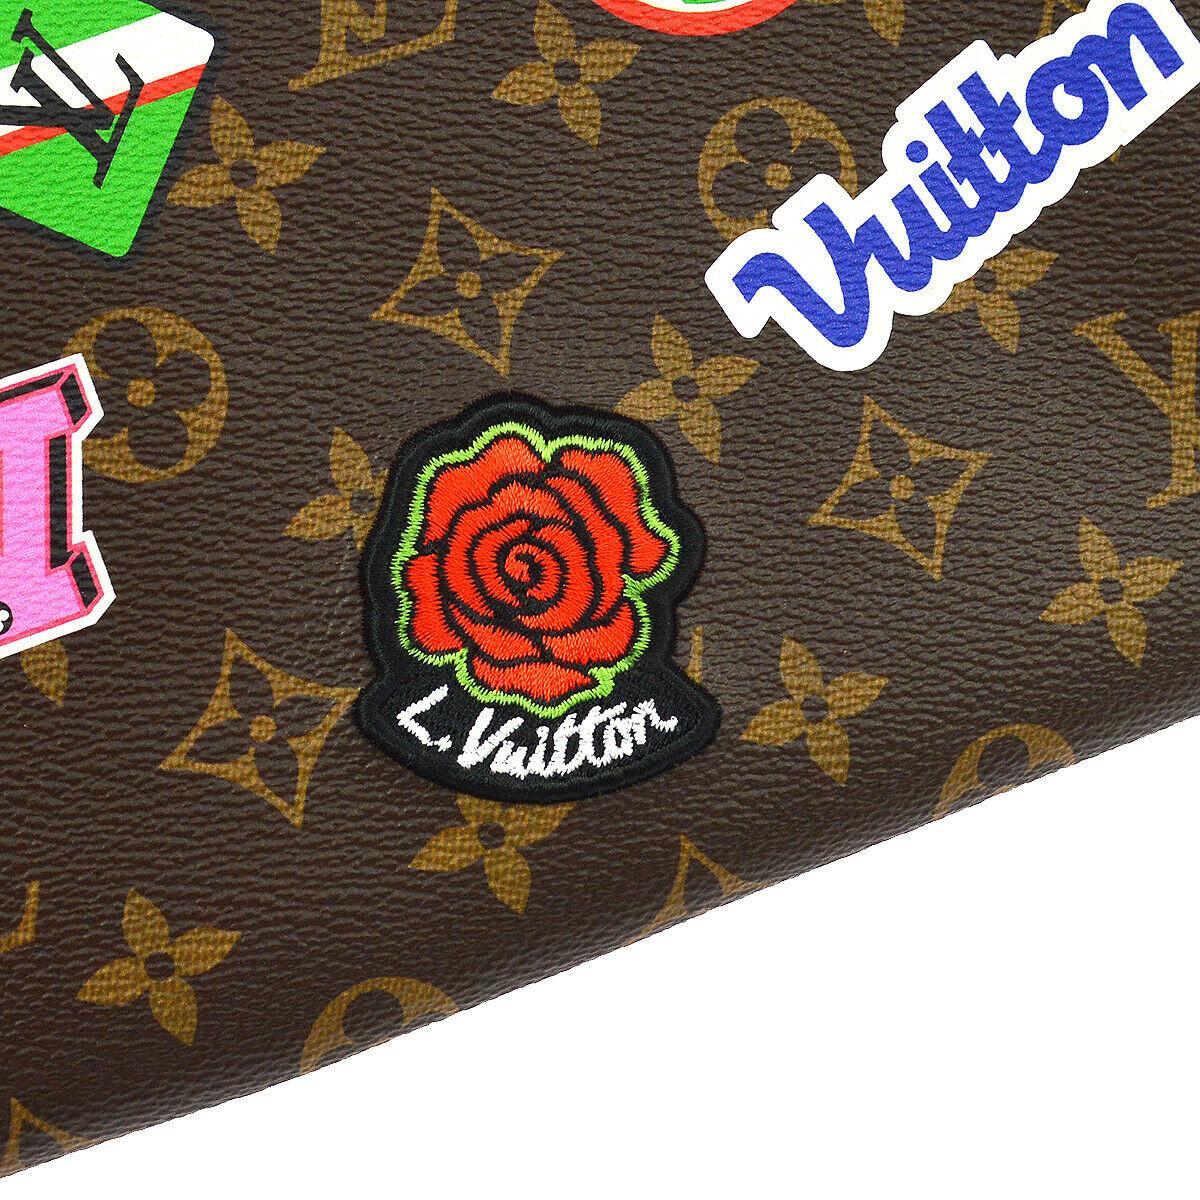 Louis Vuitton NEW Monogram City Patch Sticker Men's Women's Envelope Evening Pouch Clutch Wristlet in Box

Monogram canvas
Leather 
Woven lining
Zipper closure 
Date code present
Made in Spain
Measures 8.75